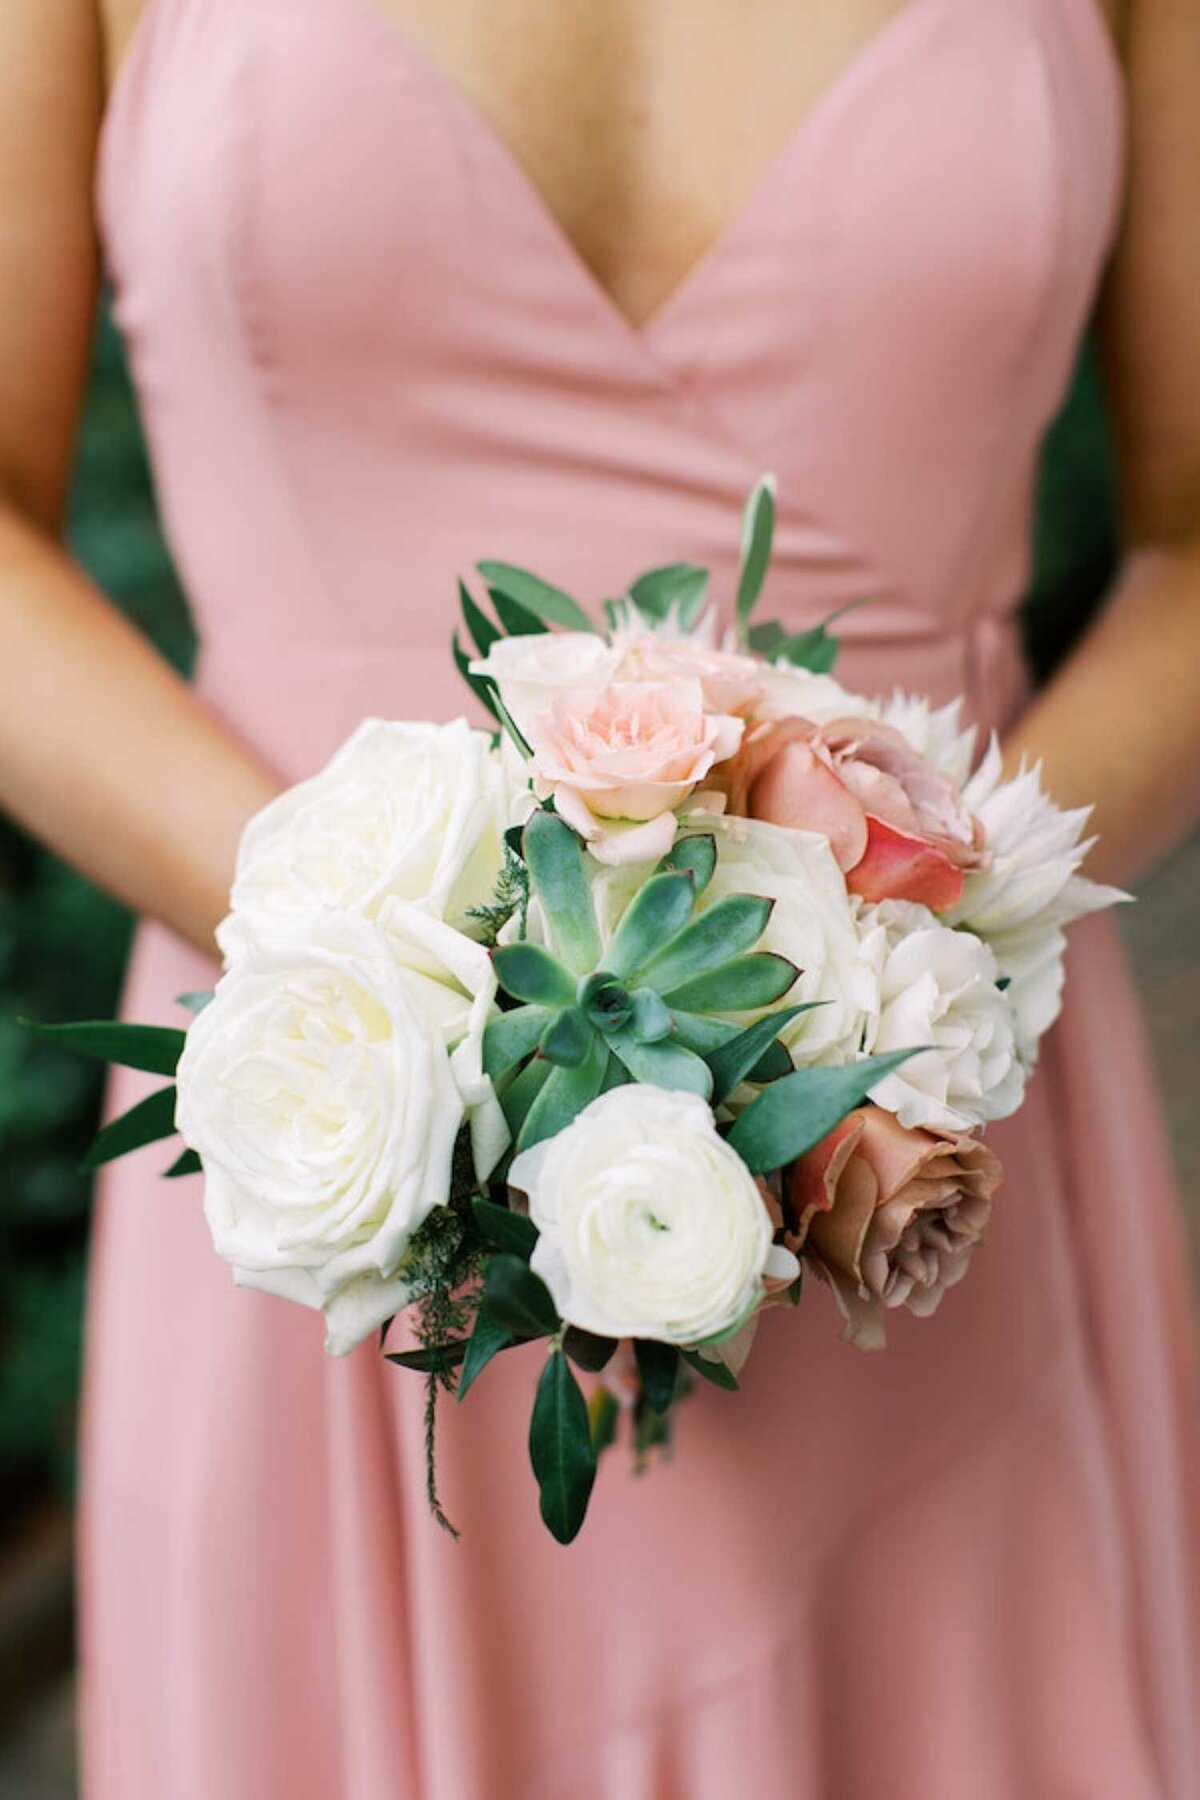 Romantic bridesmaids bouquet with succulents and  soft pink bridesmaids dress at a luxury Chicago outdoor garden wedding.